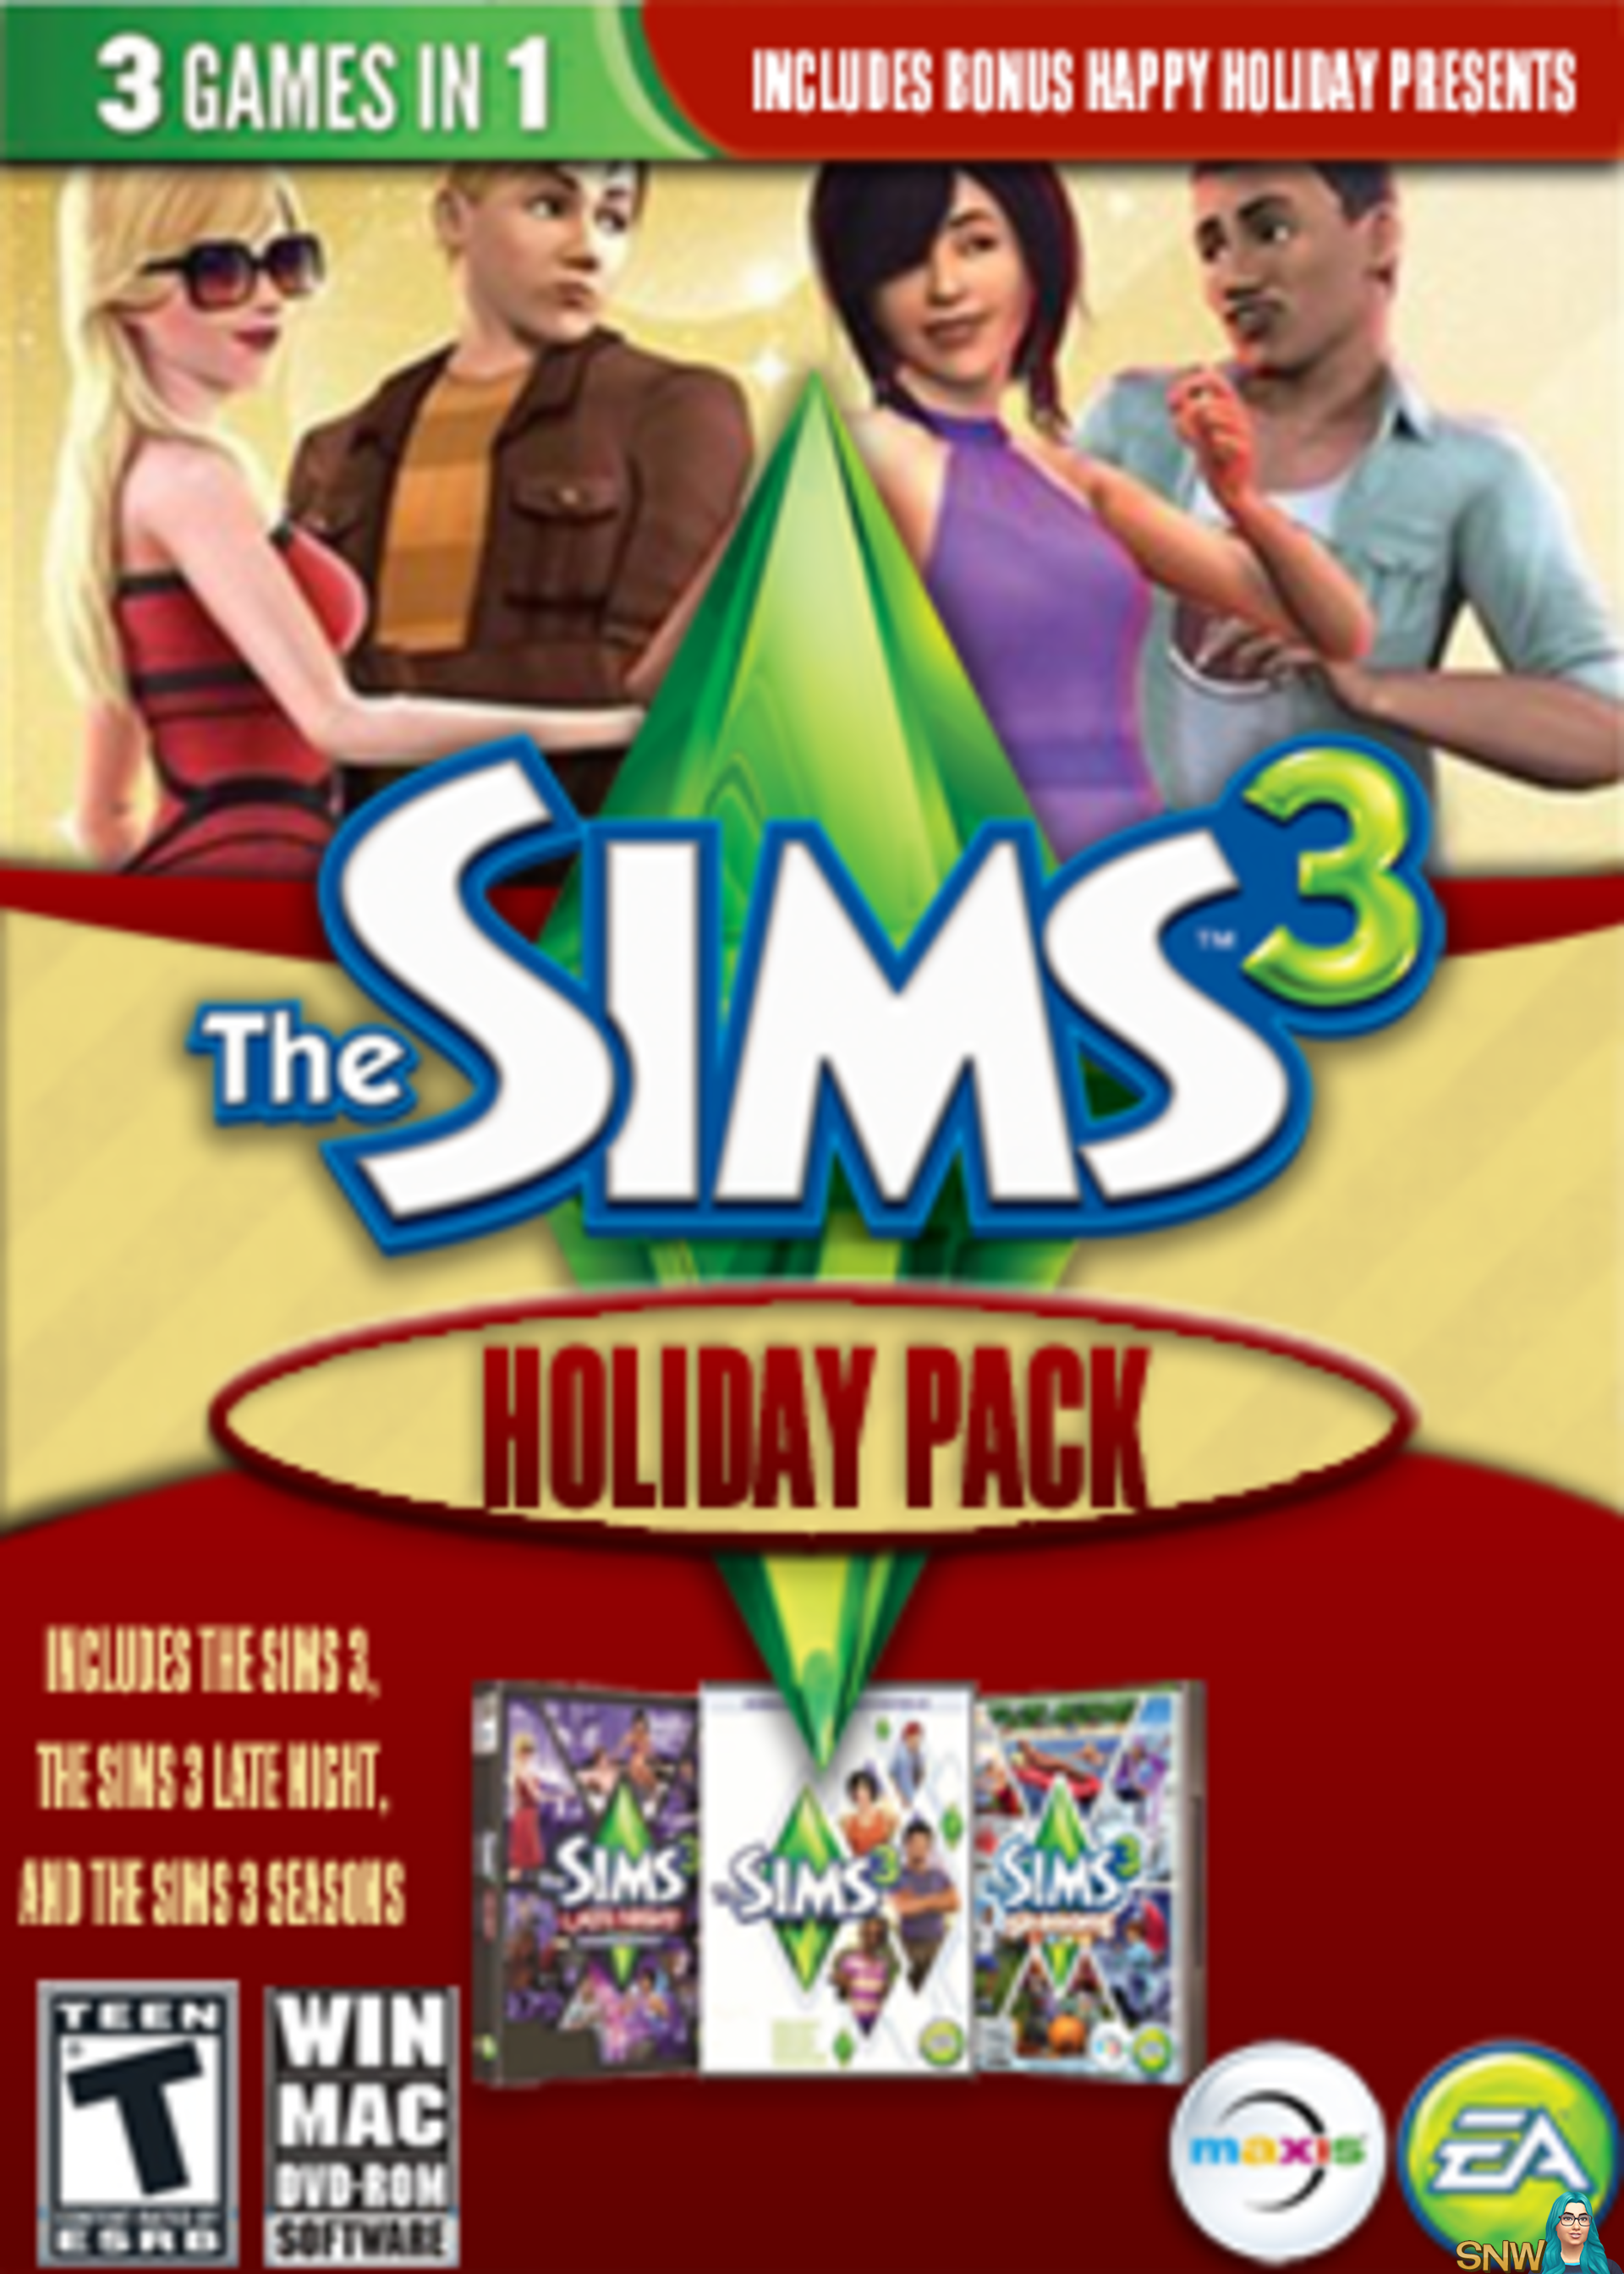 the sims 3 cc clothing pack